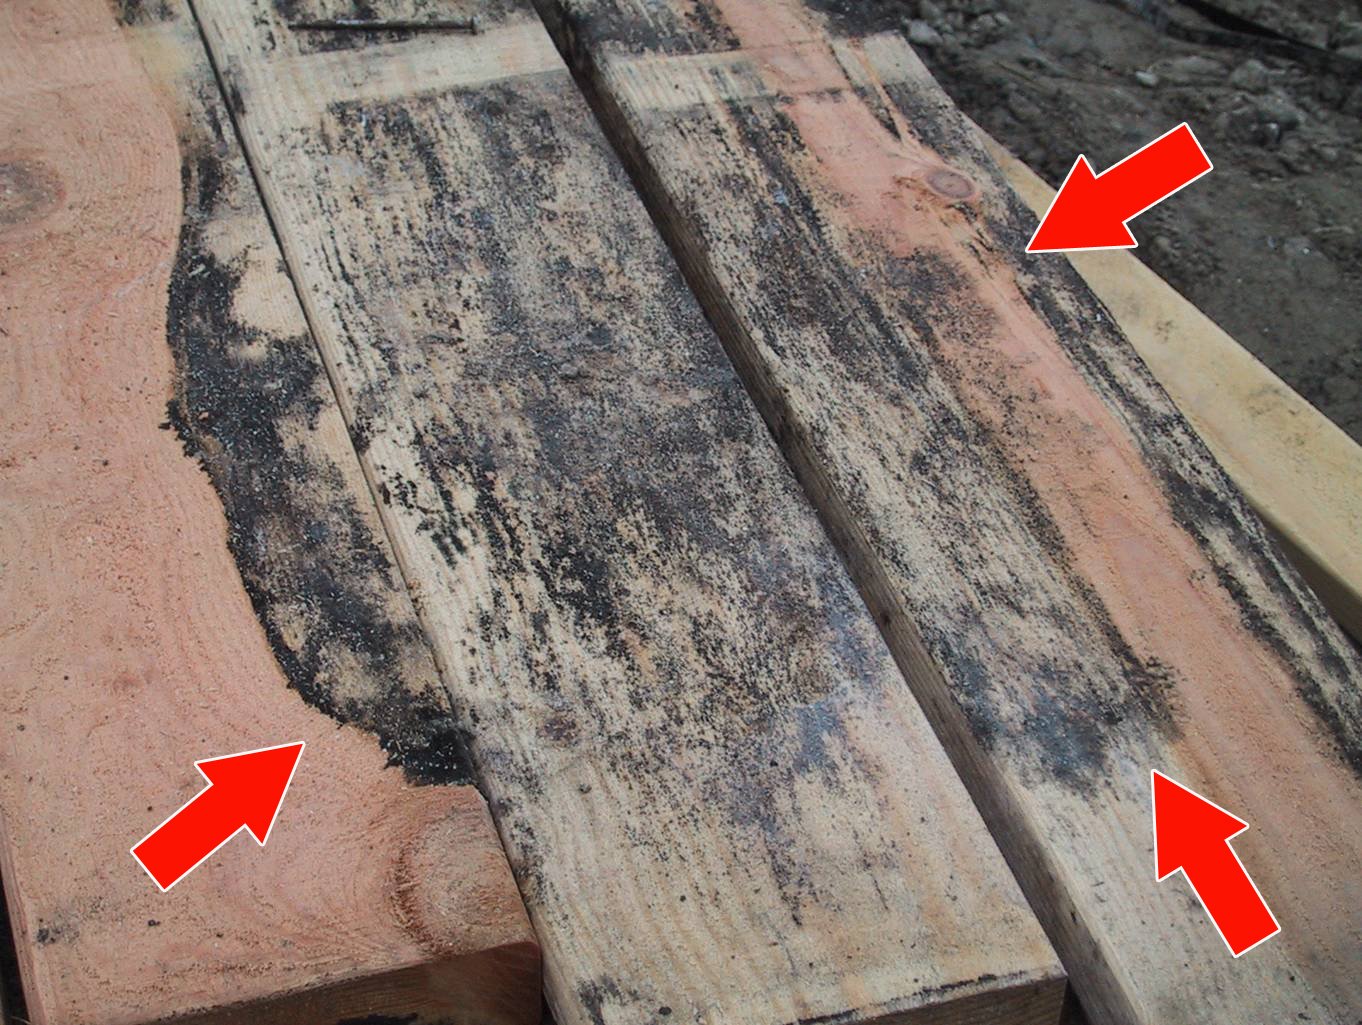 Cleaning Mold: How To Clean Mold on Lumber